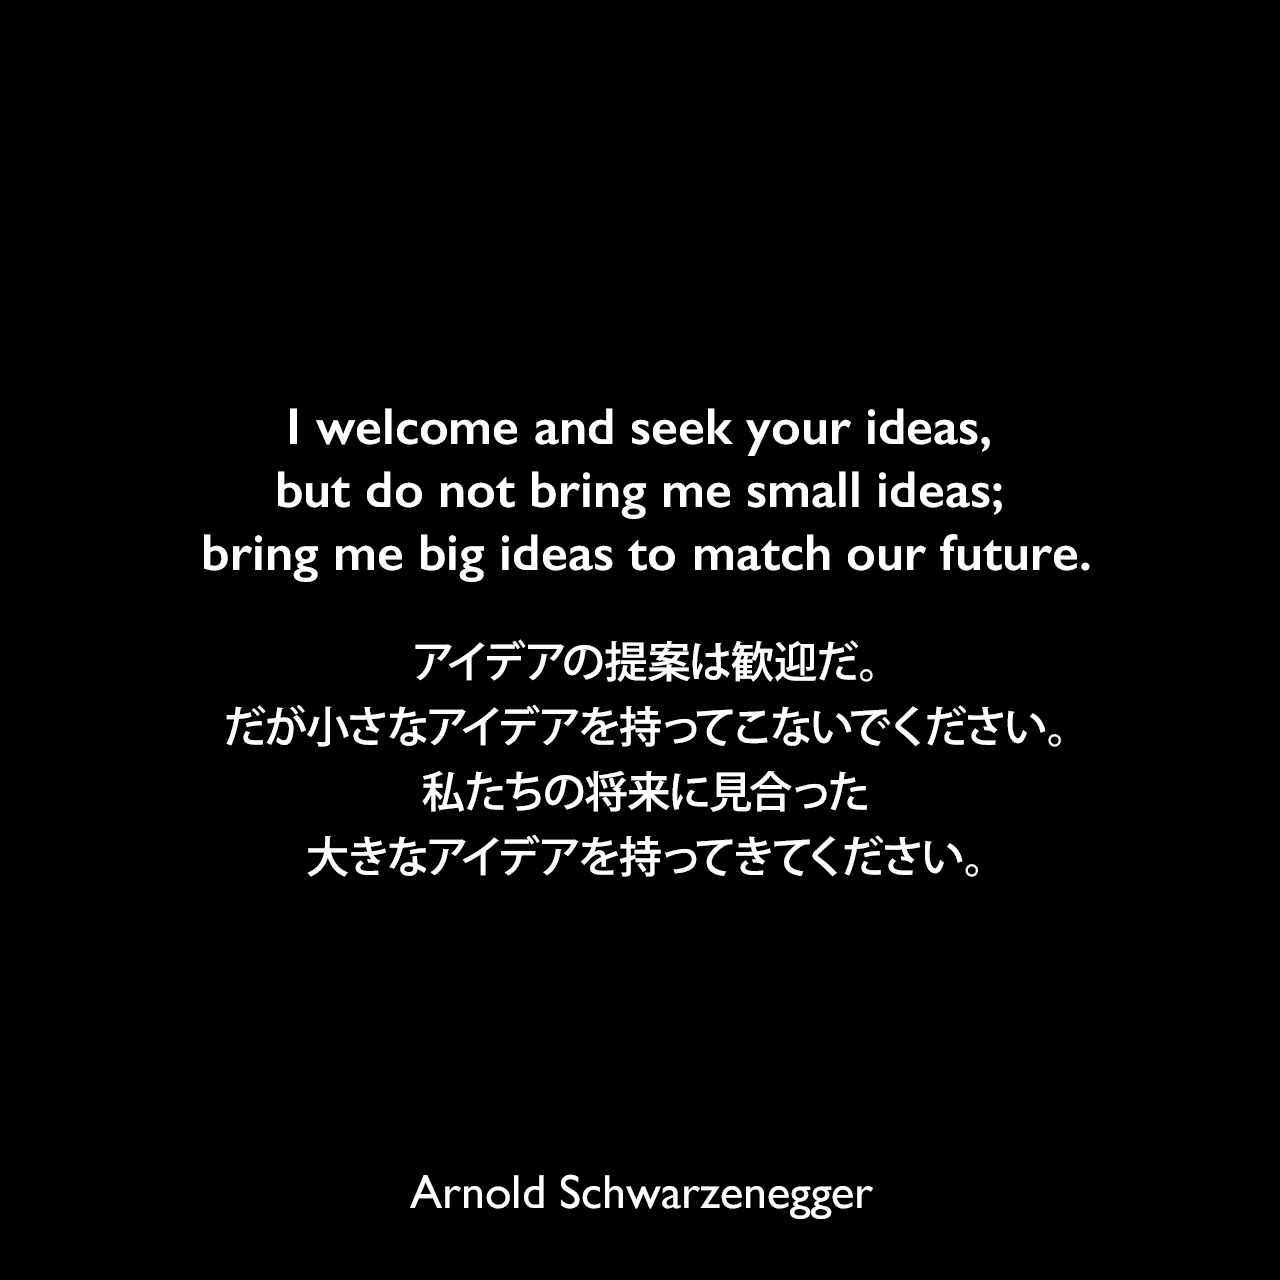 I welcome and seek your ideas, but do not bring me small ideas; bring me big ideas to match our future.アイデアの提案は歓迎だ。だが小さなアイデアを持ってこないでください。私たちの将来に見合った大きなアイデアを持ってきてください。Arnold Schwarzenegger